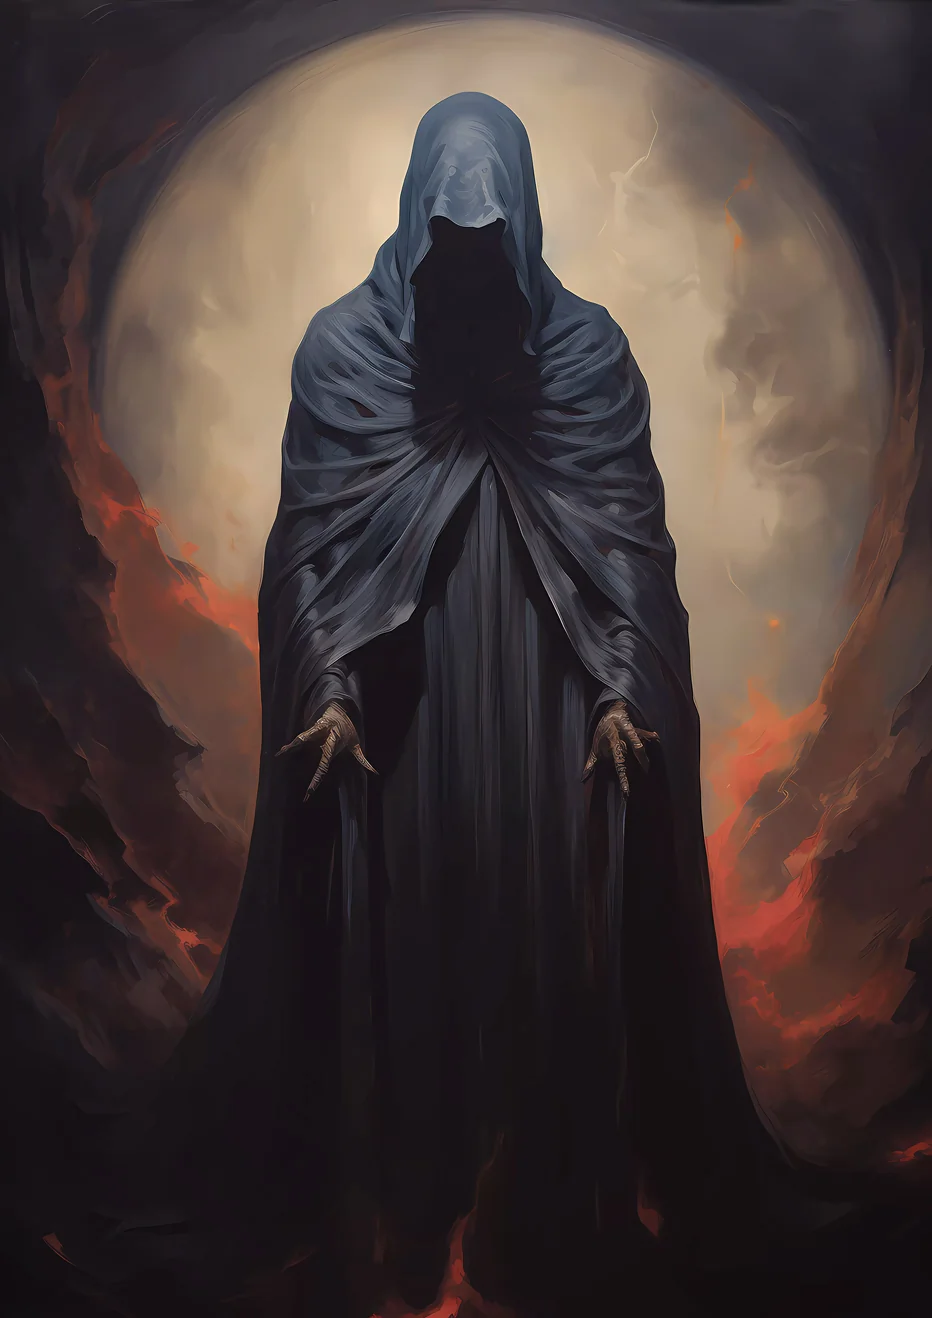 Artwork depicting an enigmatic figure in a dark cloak, surrounded by swirling winds and an otherworldly glow - 'Spellbound Reaper'